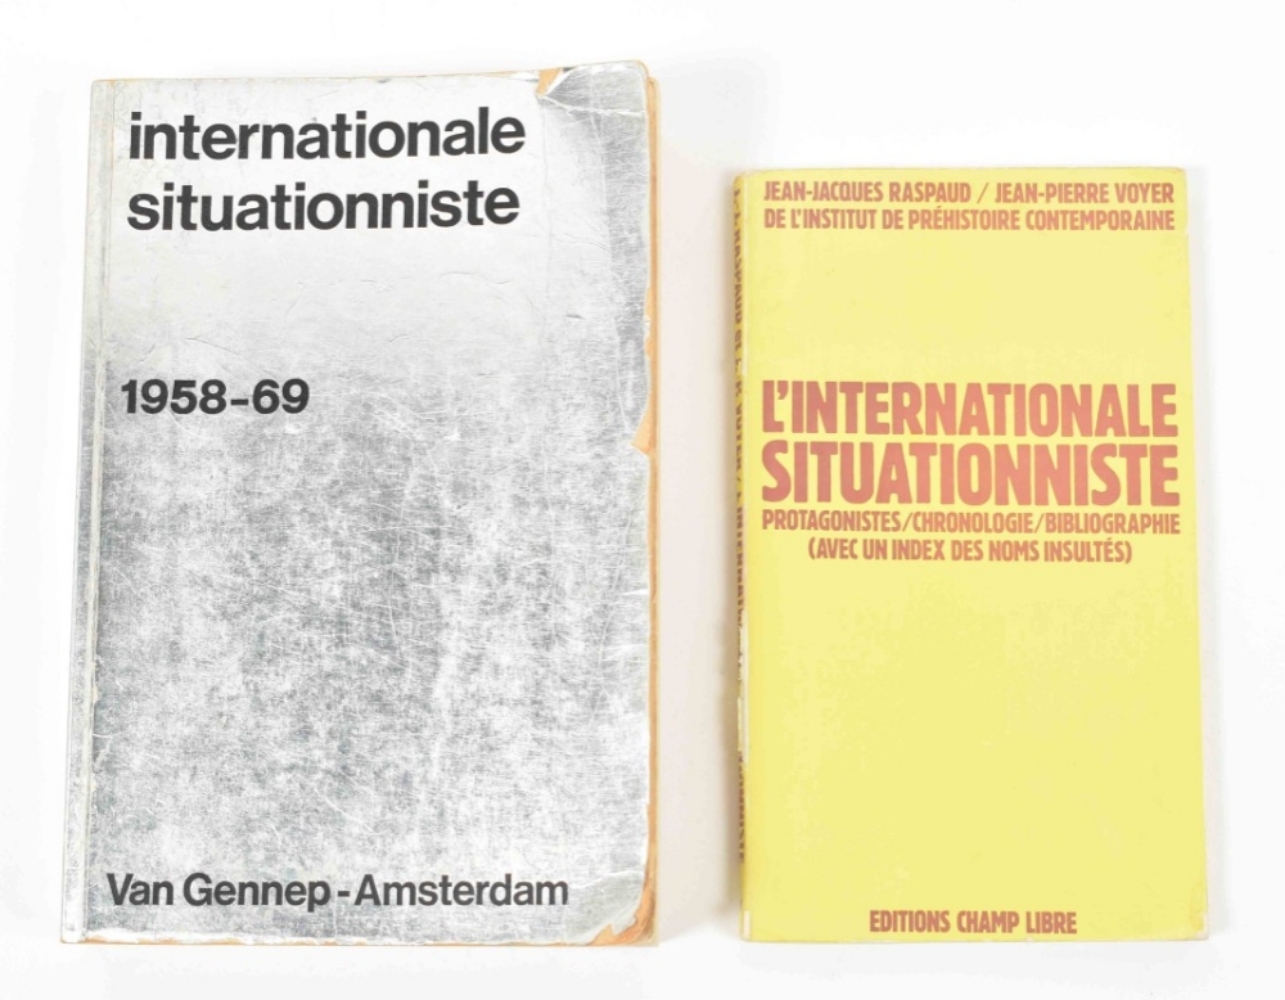 [Situationists] L'Internationale Situationniste - Image 6 of 8